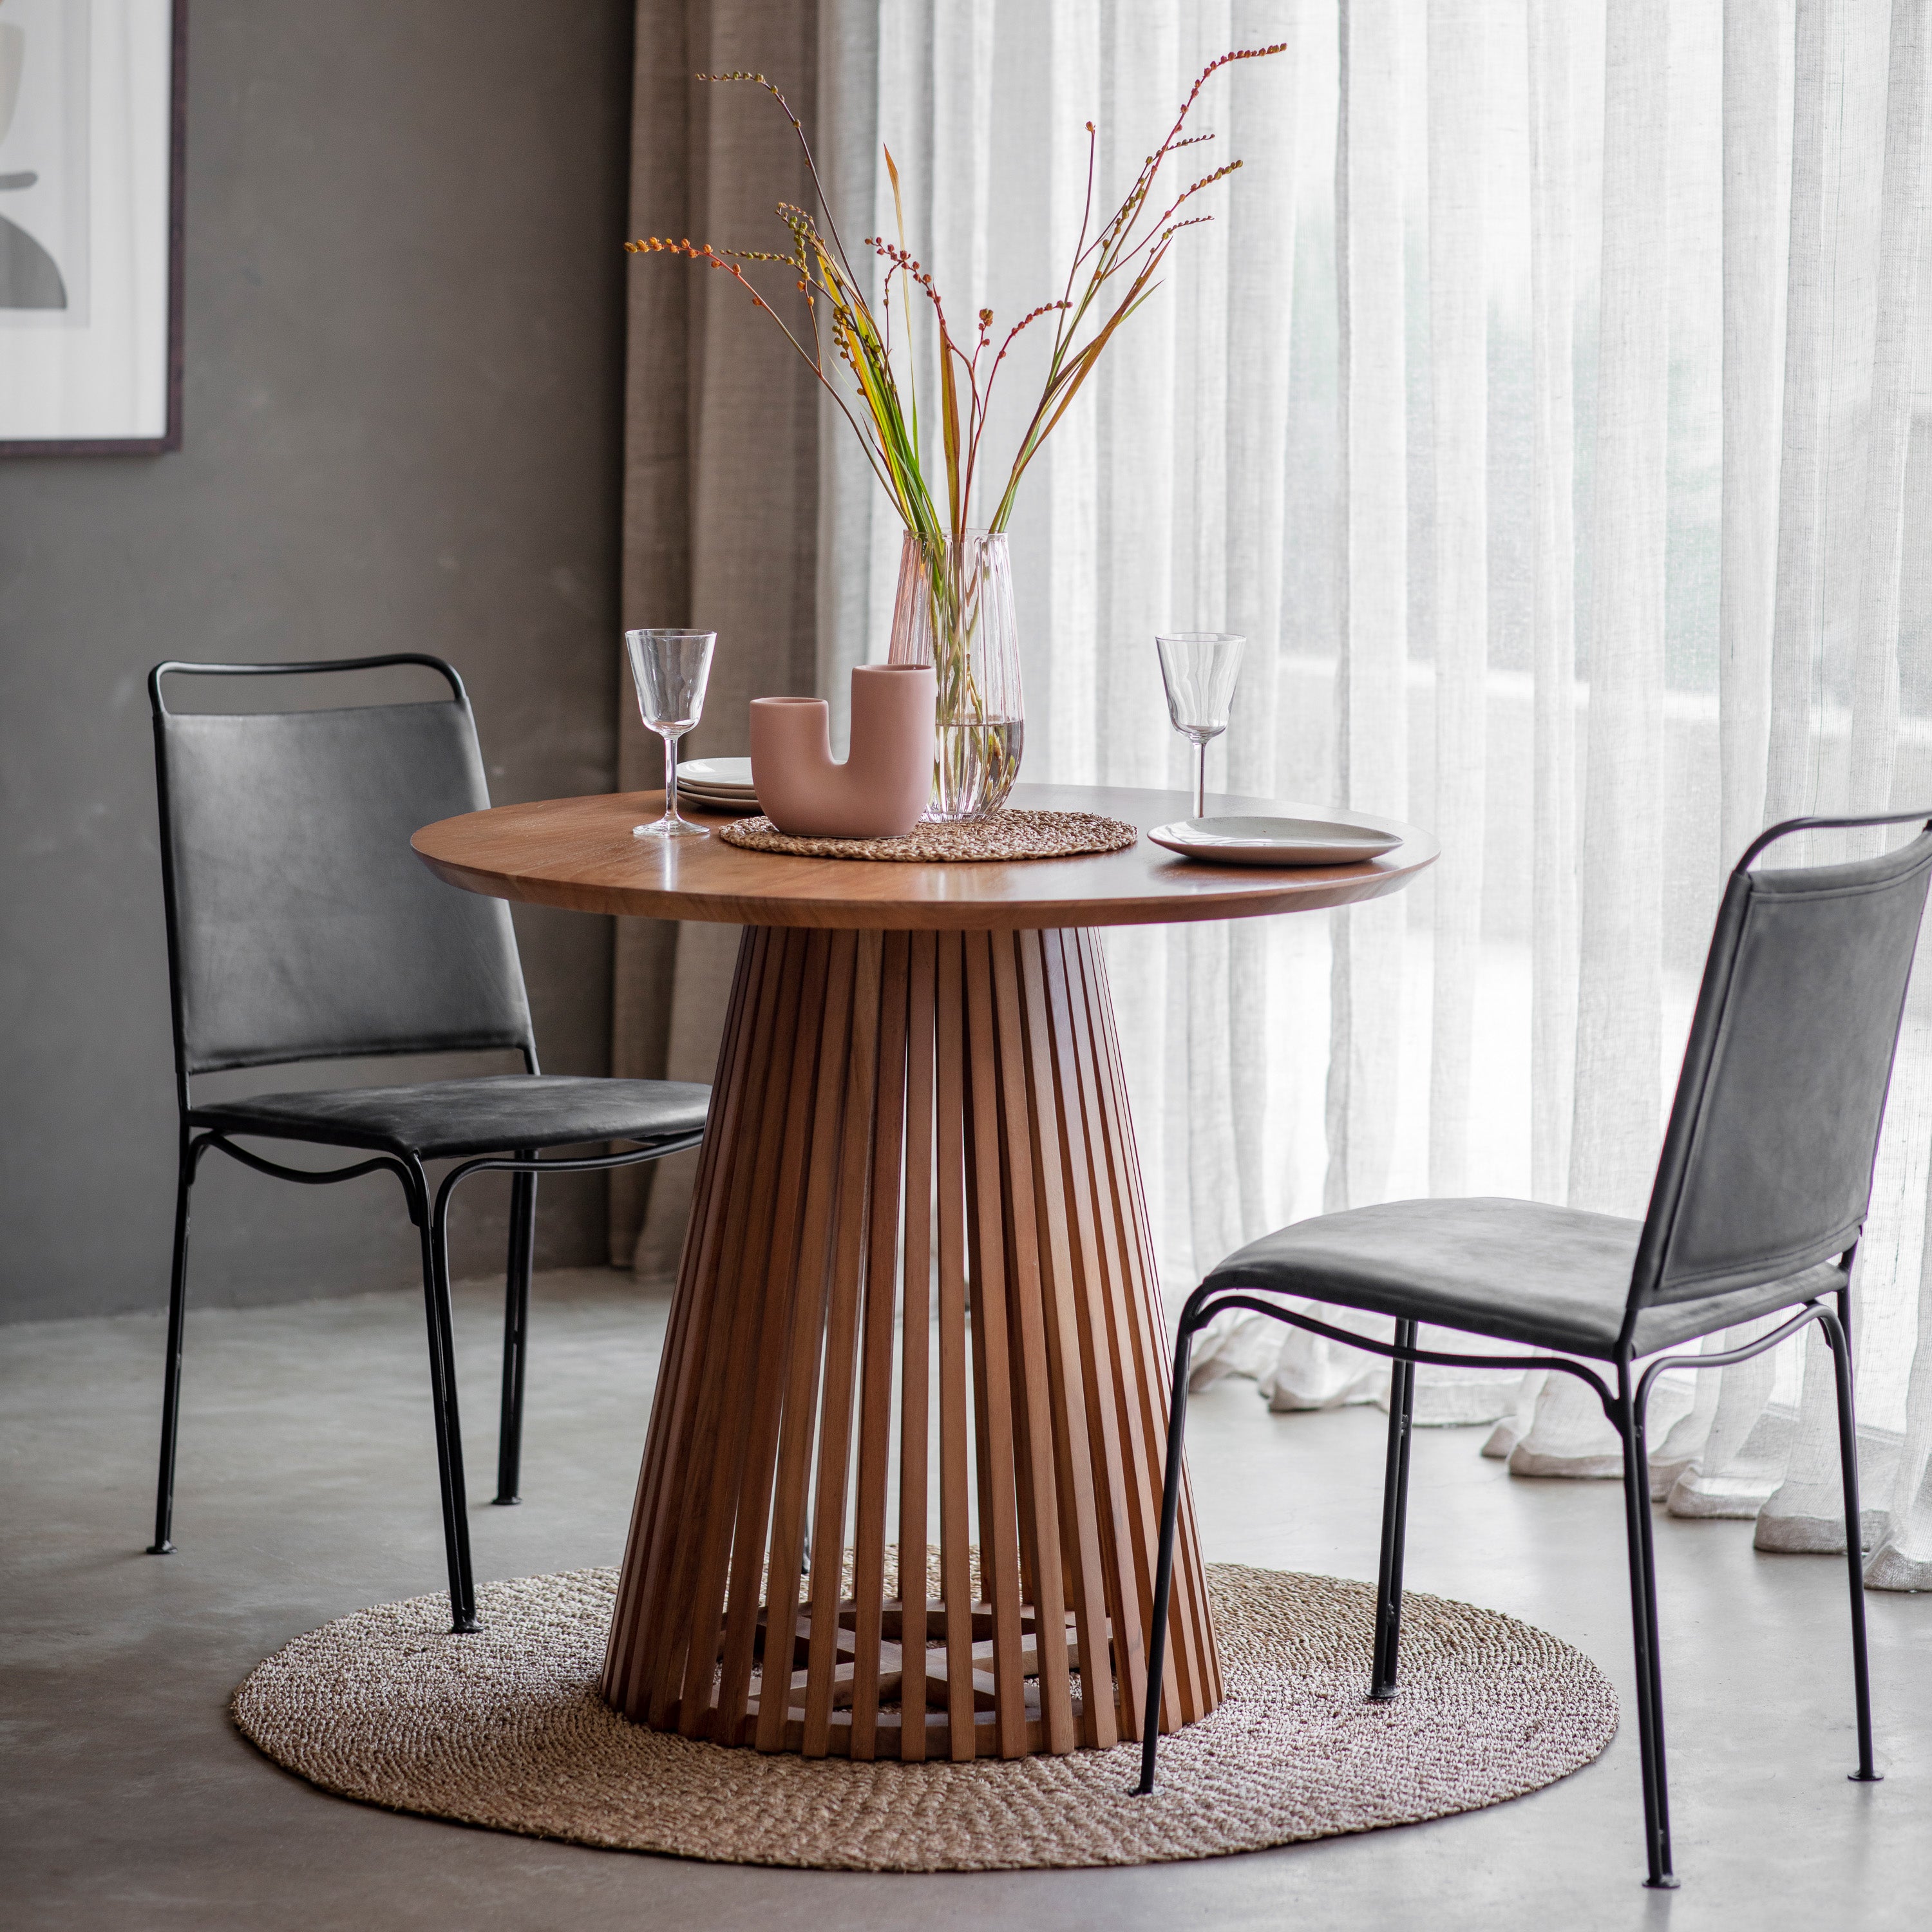 Dawson 4 Seater Round Slatted Dining Table Acacia Wood Brown